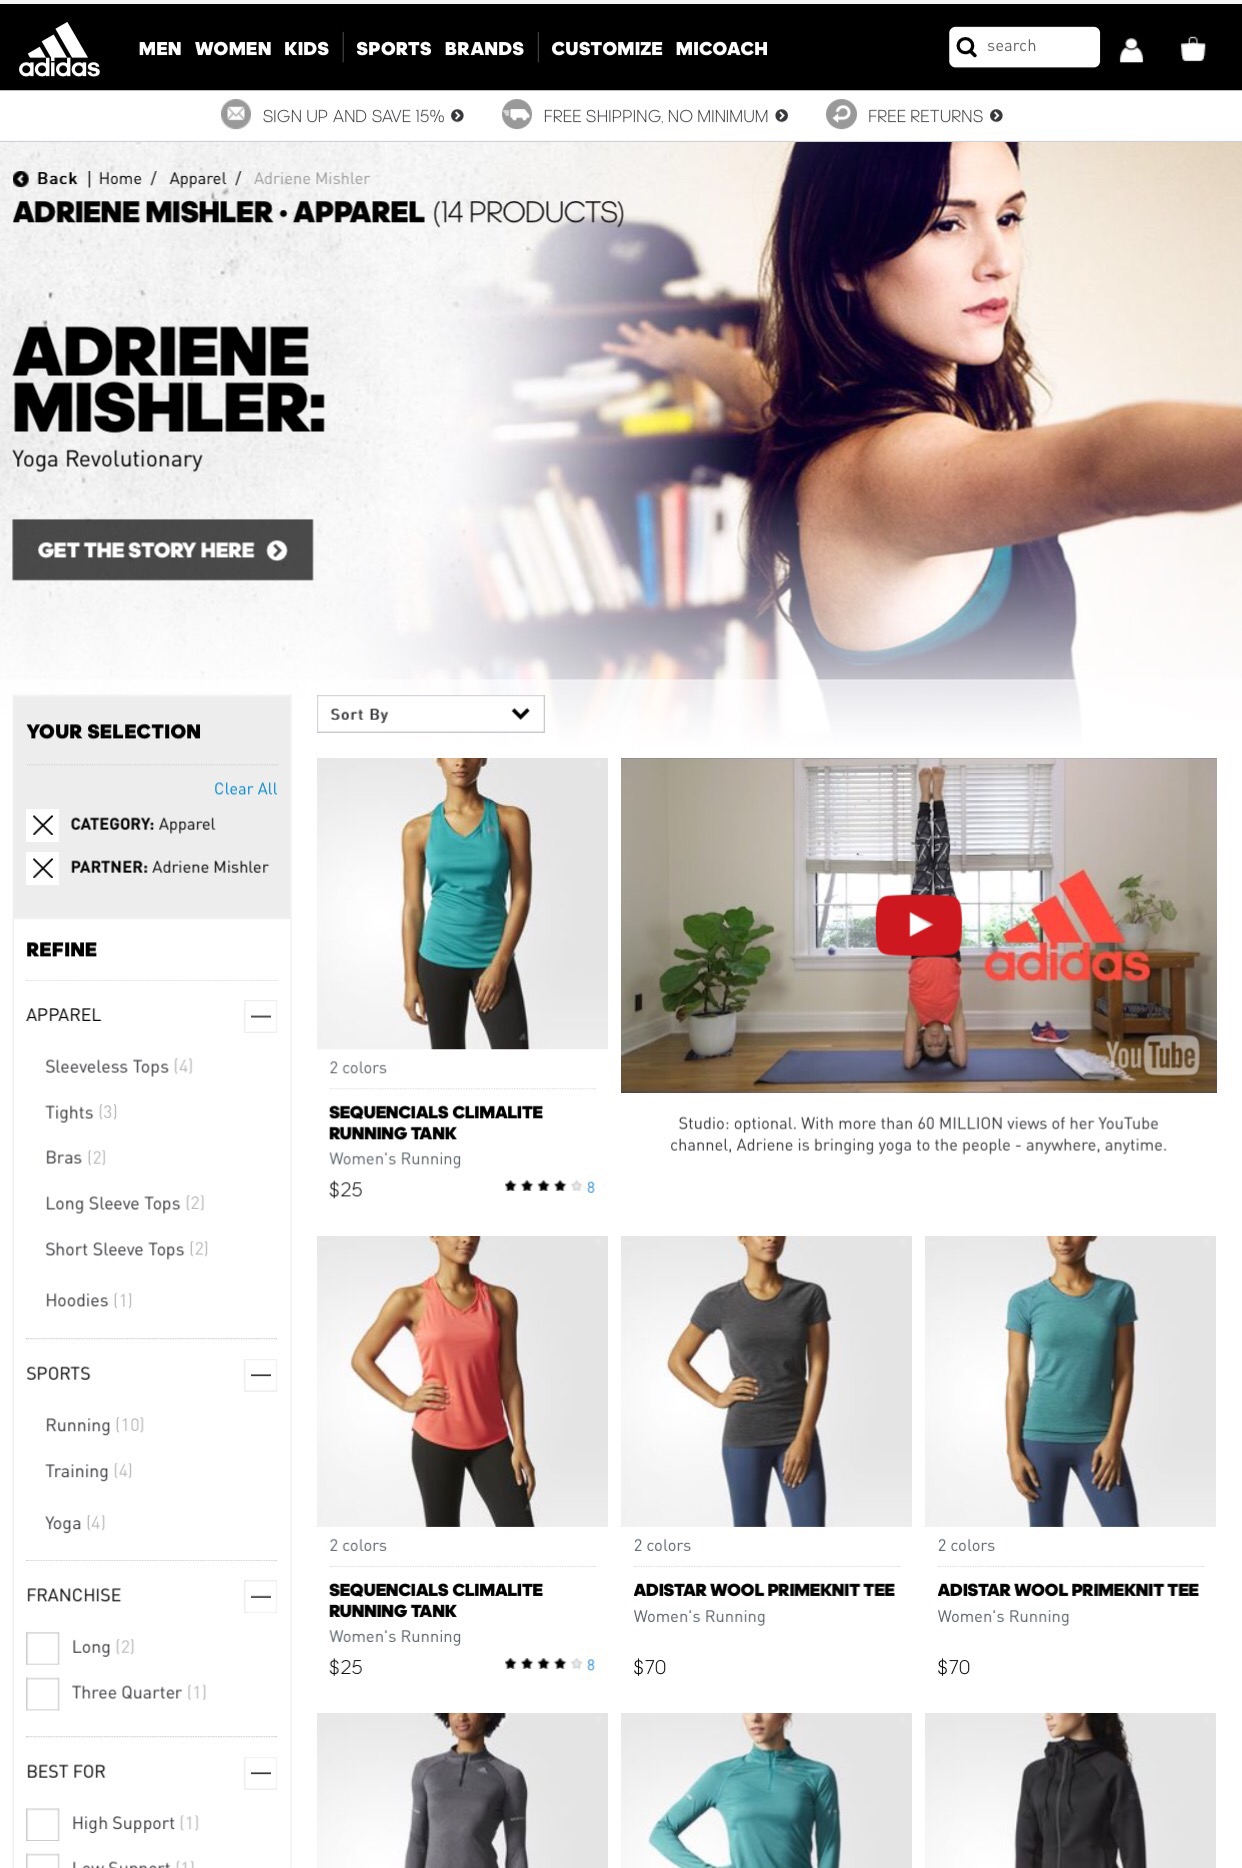 Adriene Mishler Becomes The New Face of Adidas Yoga Clothing Line